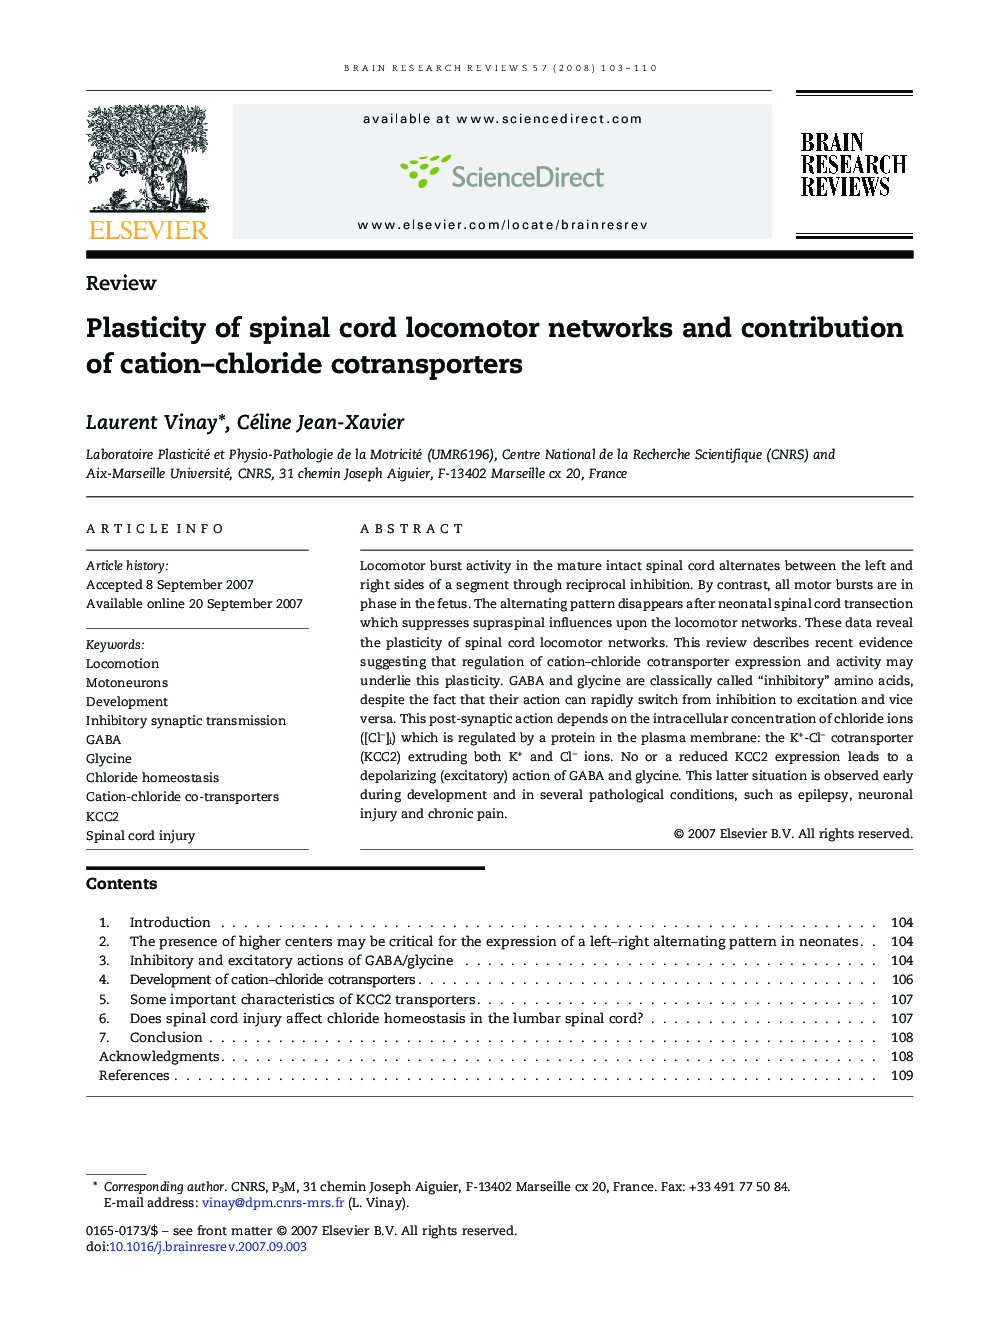 Plasticity of spinal cord locomotor networks and contribution of cation–chloride cotransporters